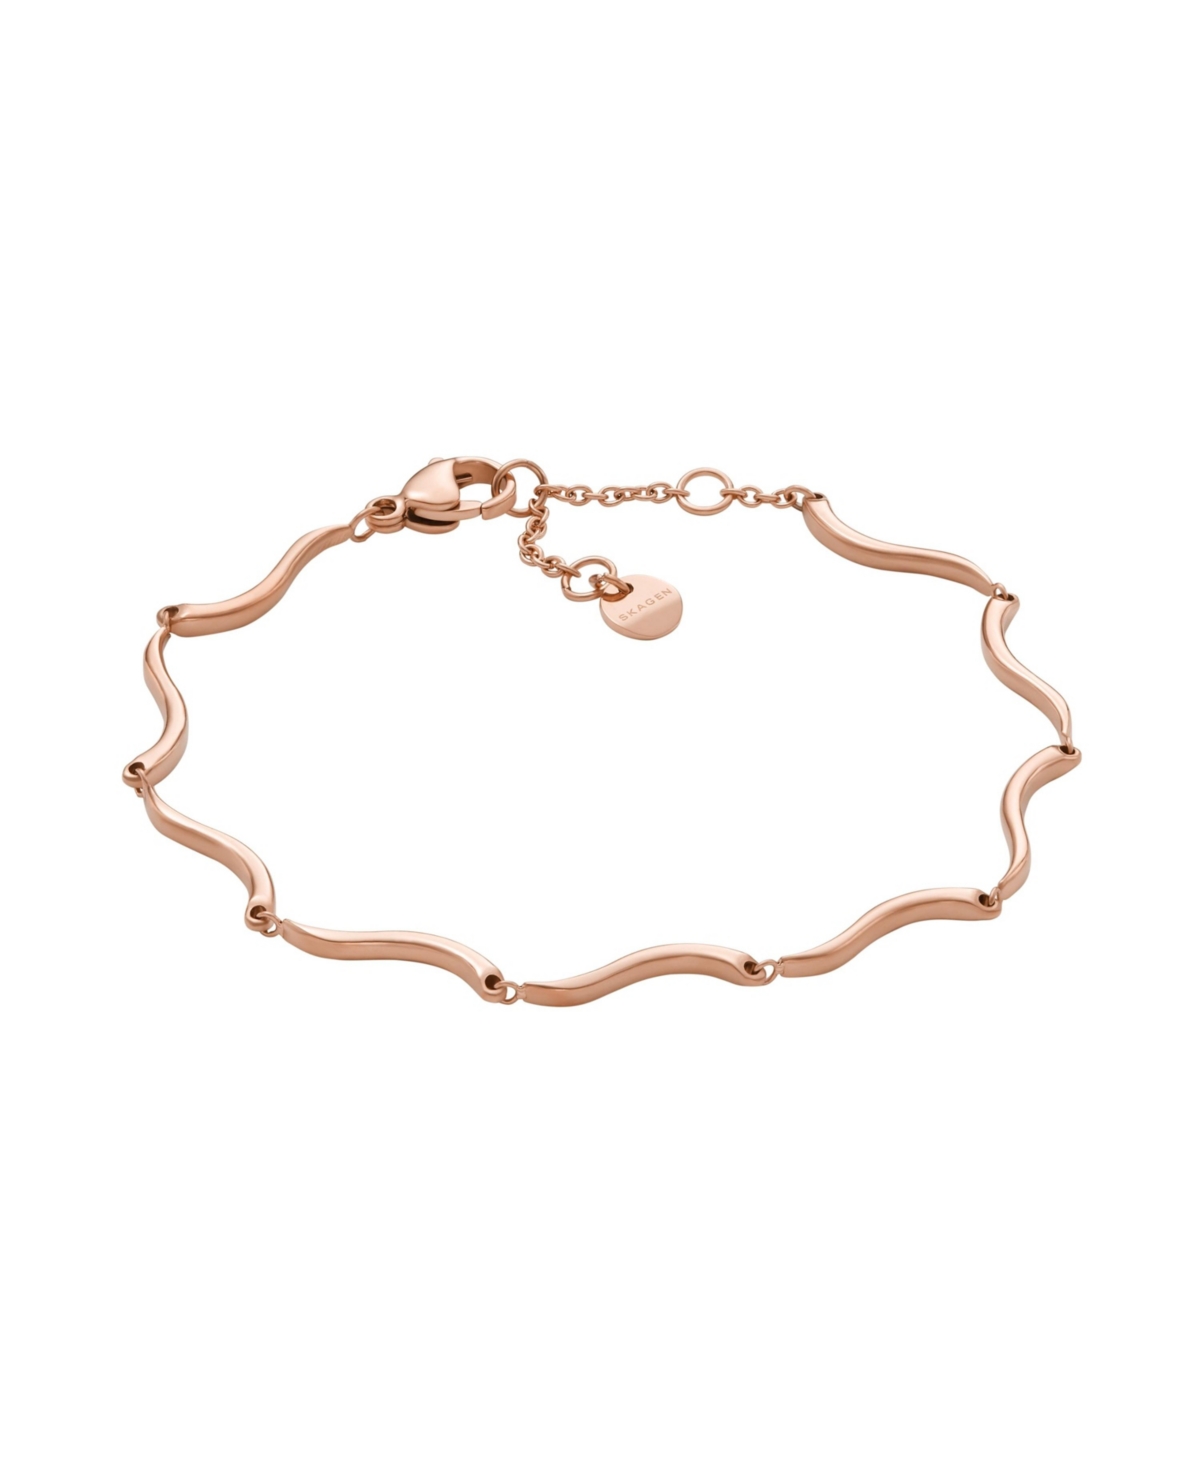 Women's Essential Waves Rose Gold-Tone Stainless Steel Chain Bracelet - Pink